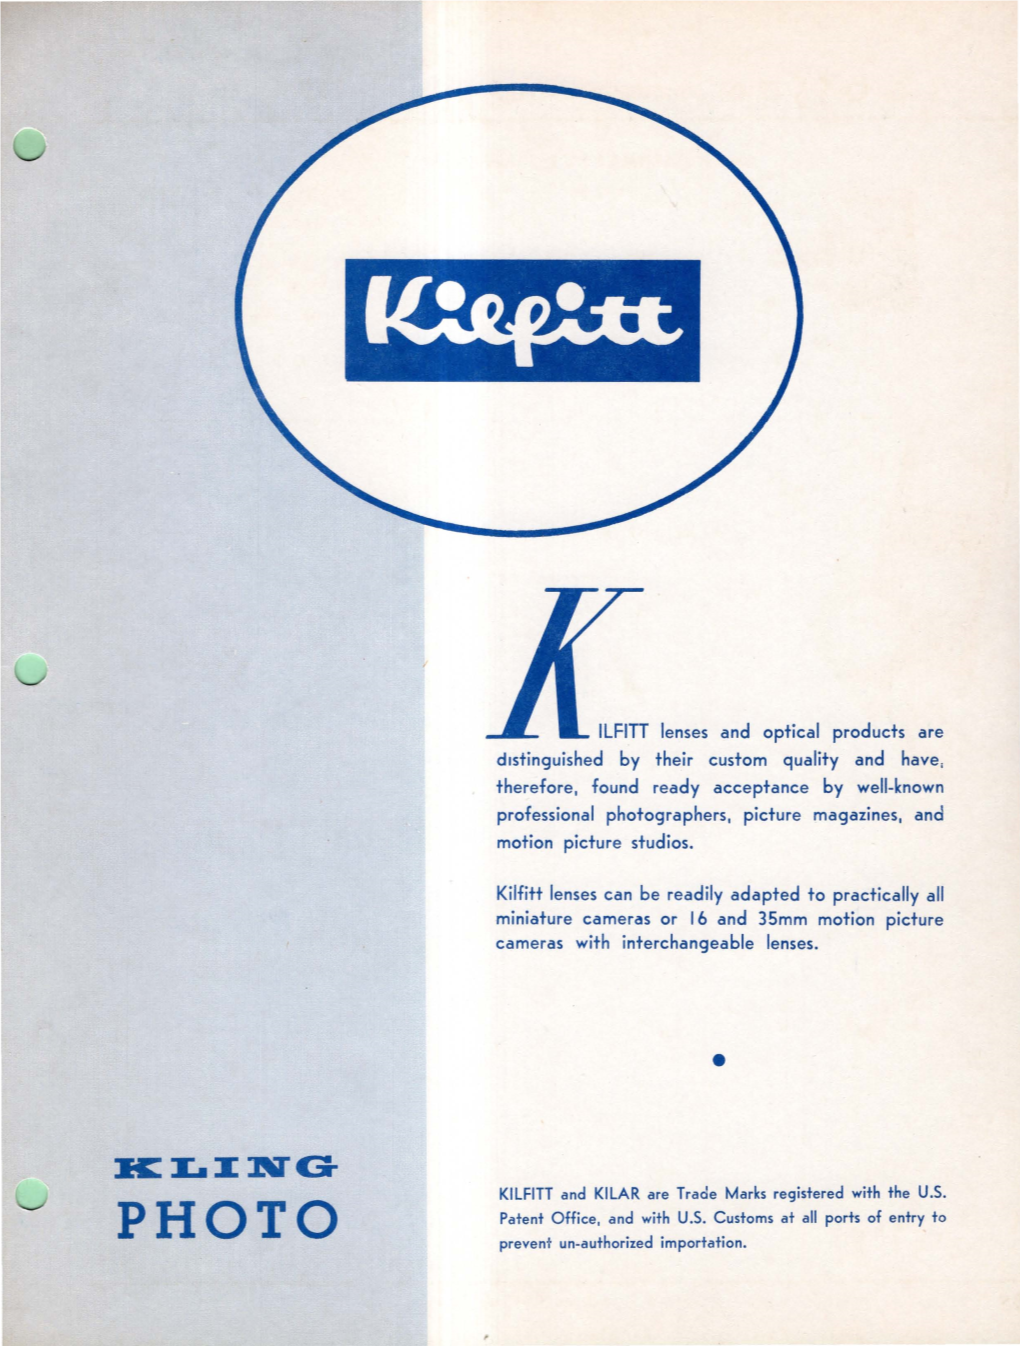 At G- KILFITT and KILAR Are Trade Marks Registered with the U.S